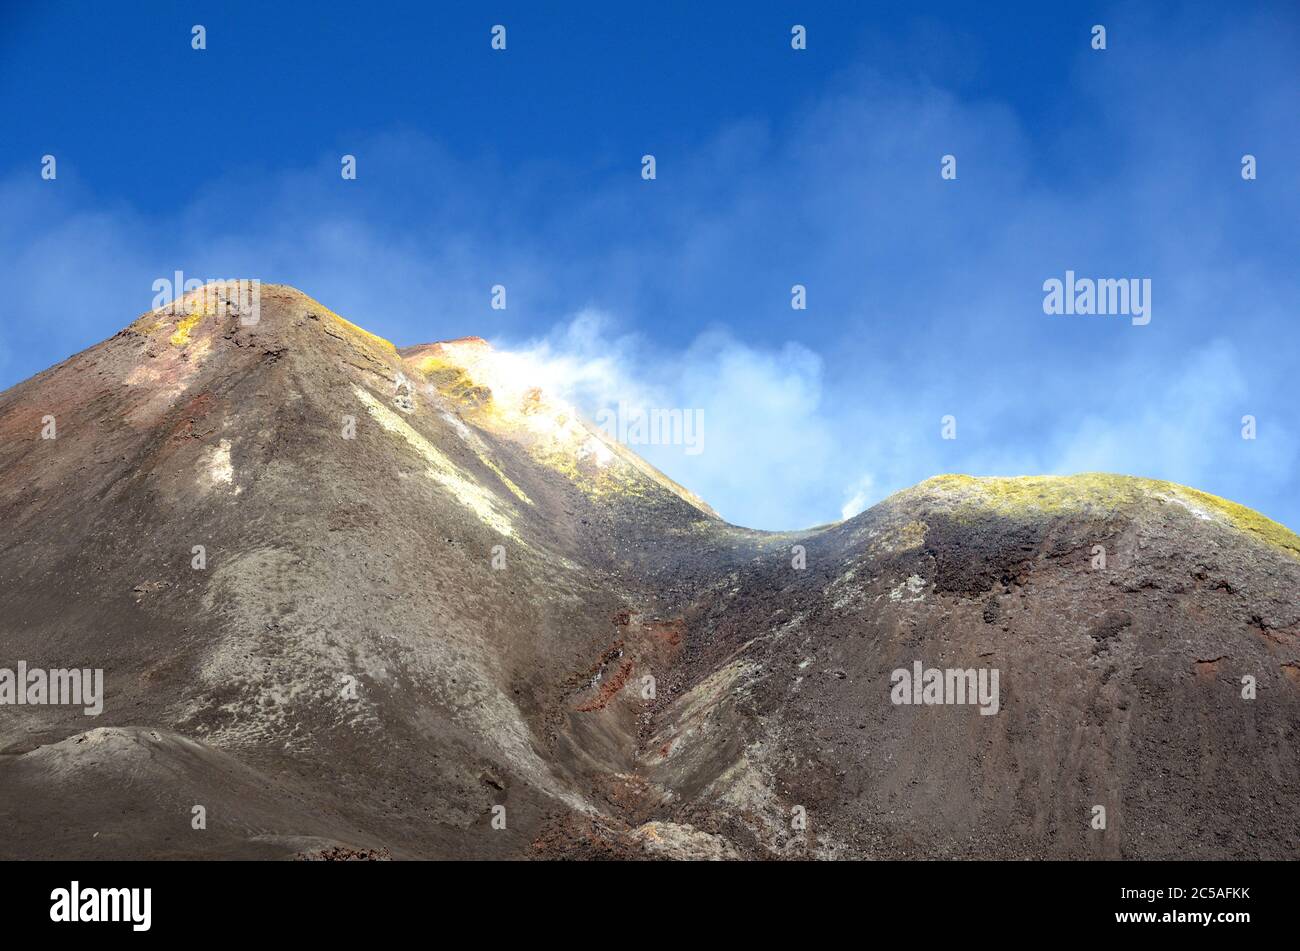 Landscape of Mount Etna, an active volcano on the east coast of Sicily, close to Messina and Catania. Stock Photo